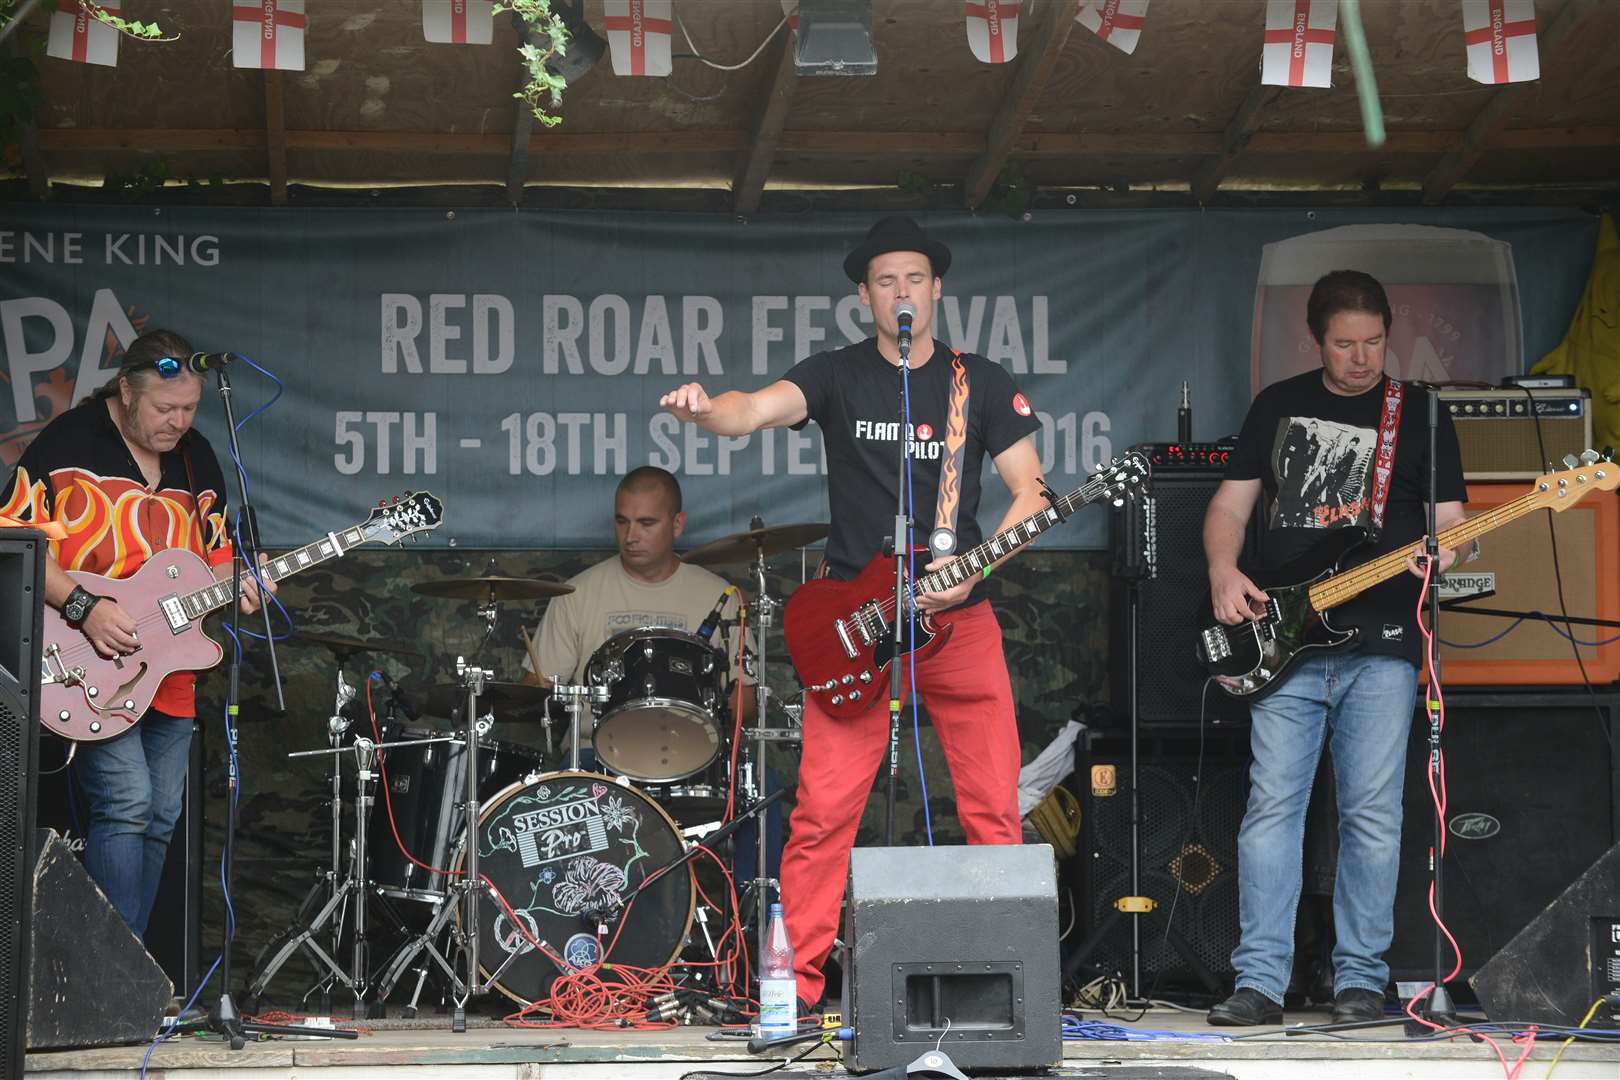 The Flame Pilots performing at the Red Roar Festival